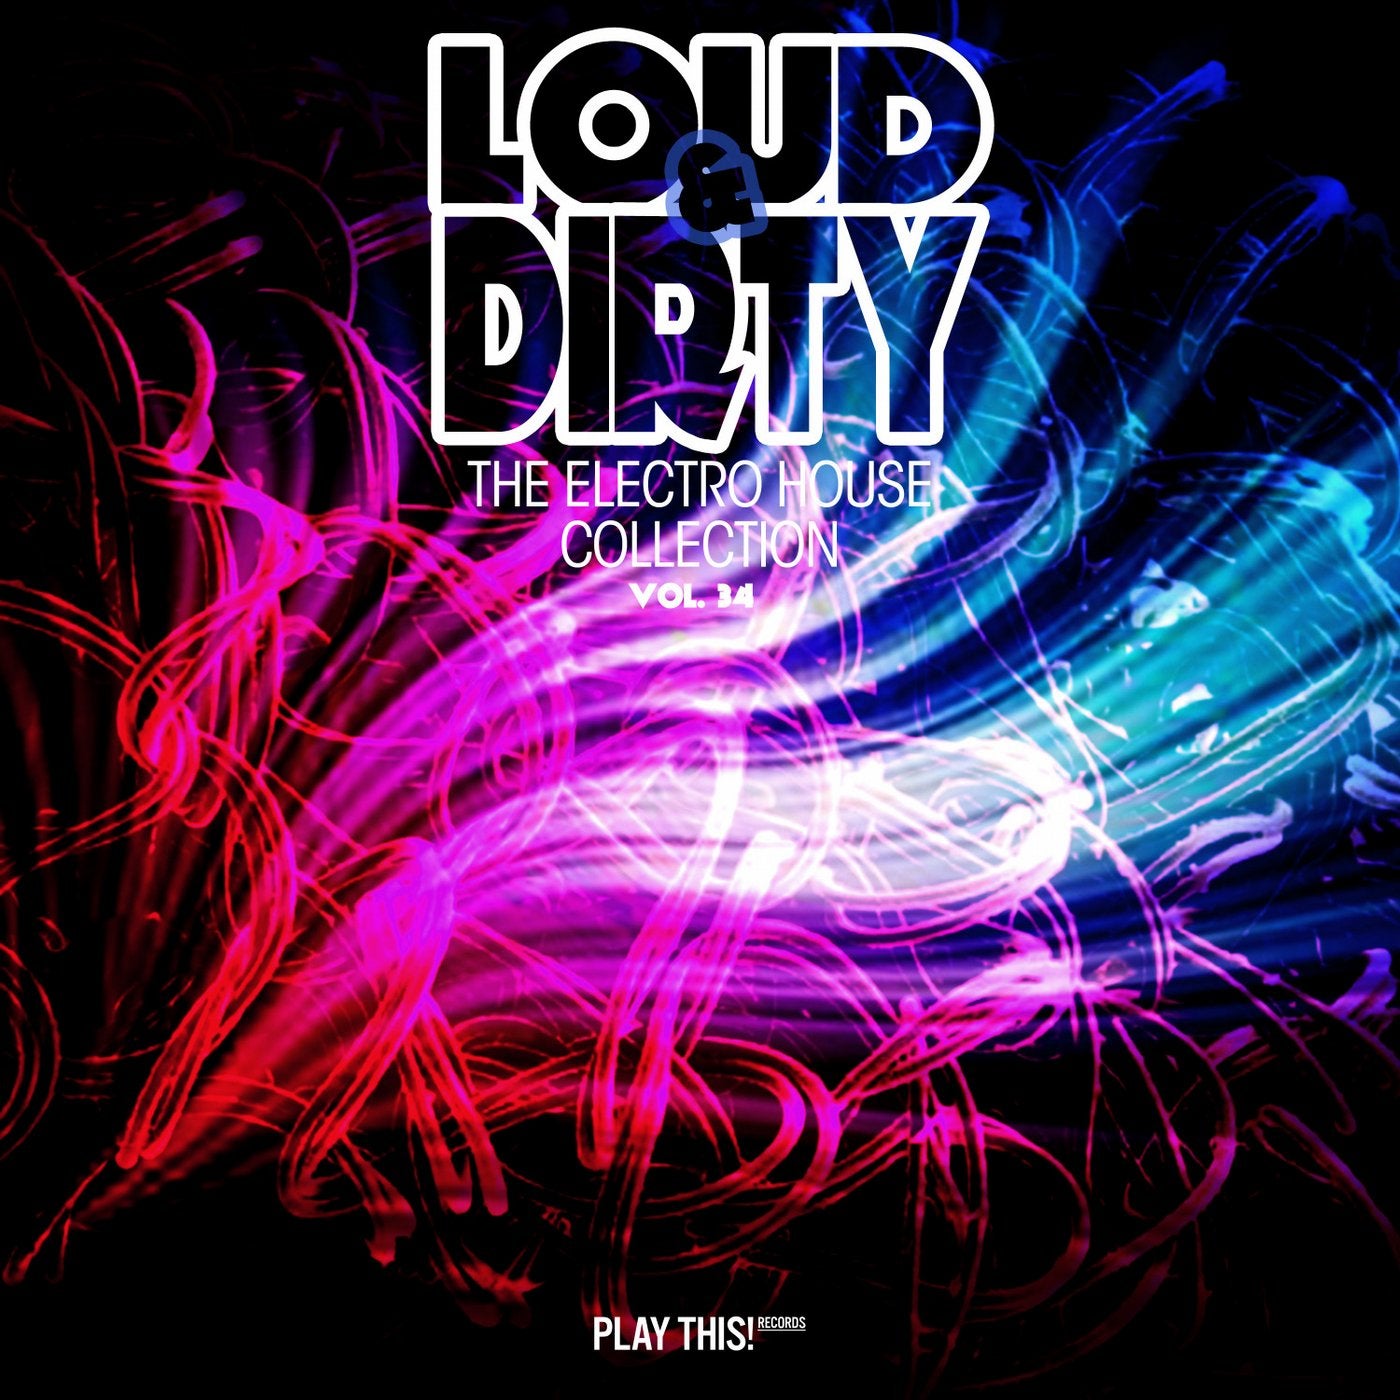 Loud & Dirty - The Electro House Collection, Vol. 34